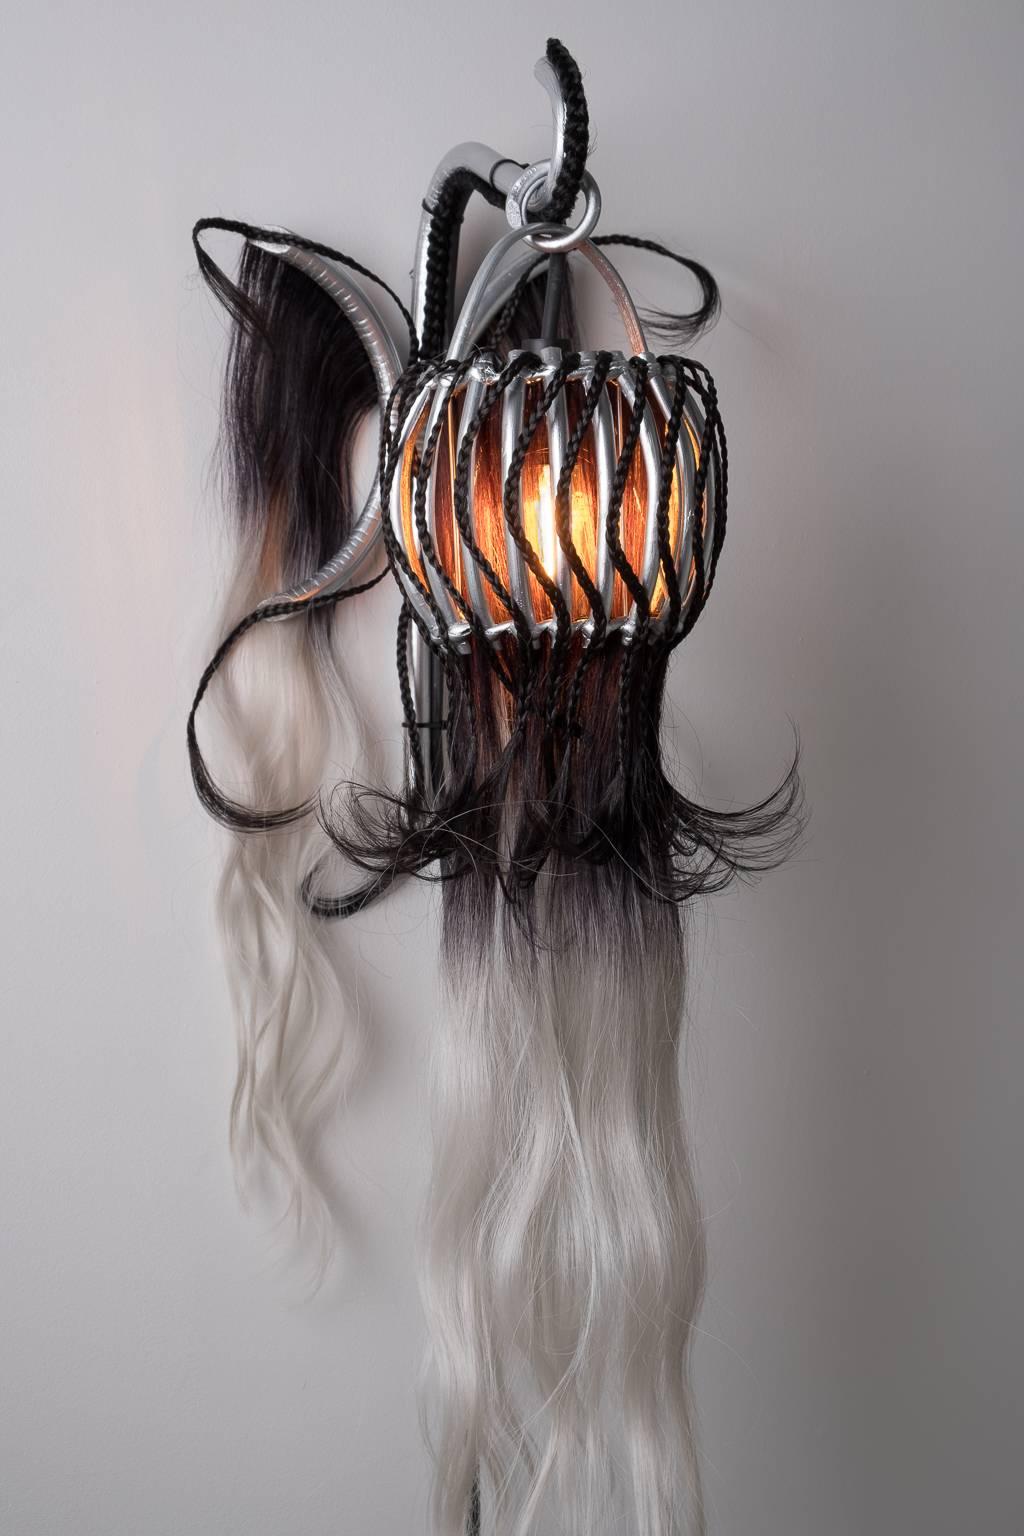 Rattan sconce and synthetic fibers, unique pieces, produced by the artist Micki Chomicki and his team of French art craftsmen.
Measure: H 34cm, L 30cm, P 24cm.